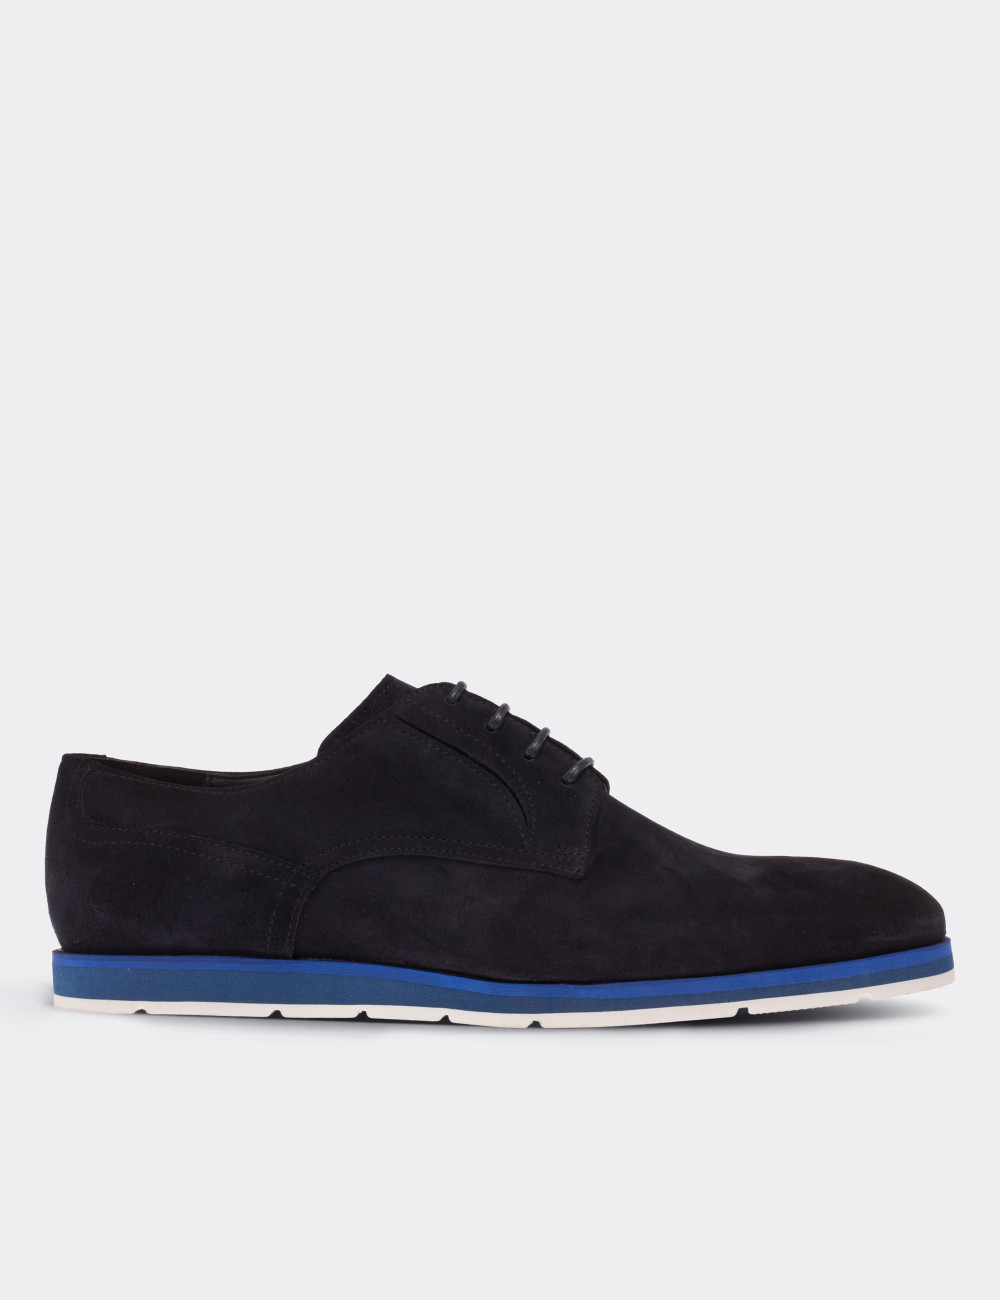 Navy Suede Leather Lace-up Shoes - 01294MLCVE10